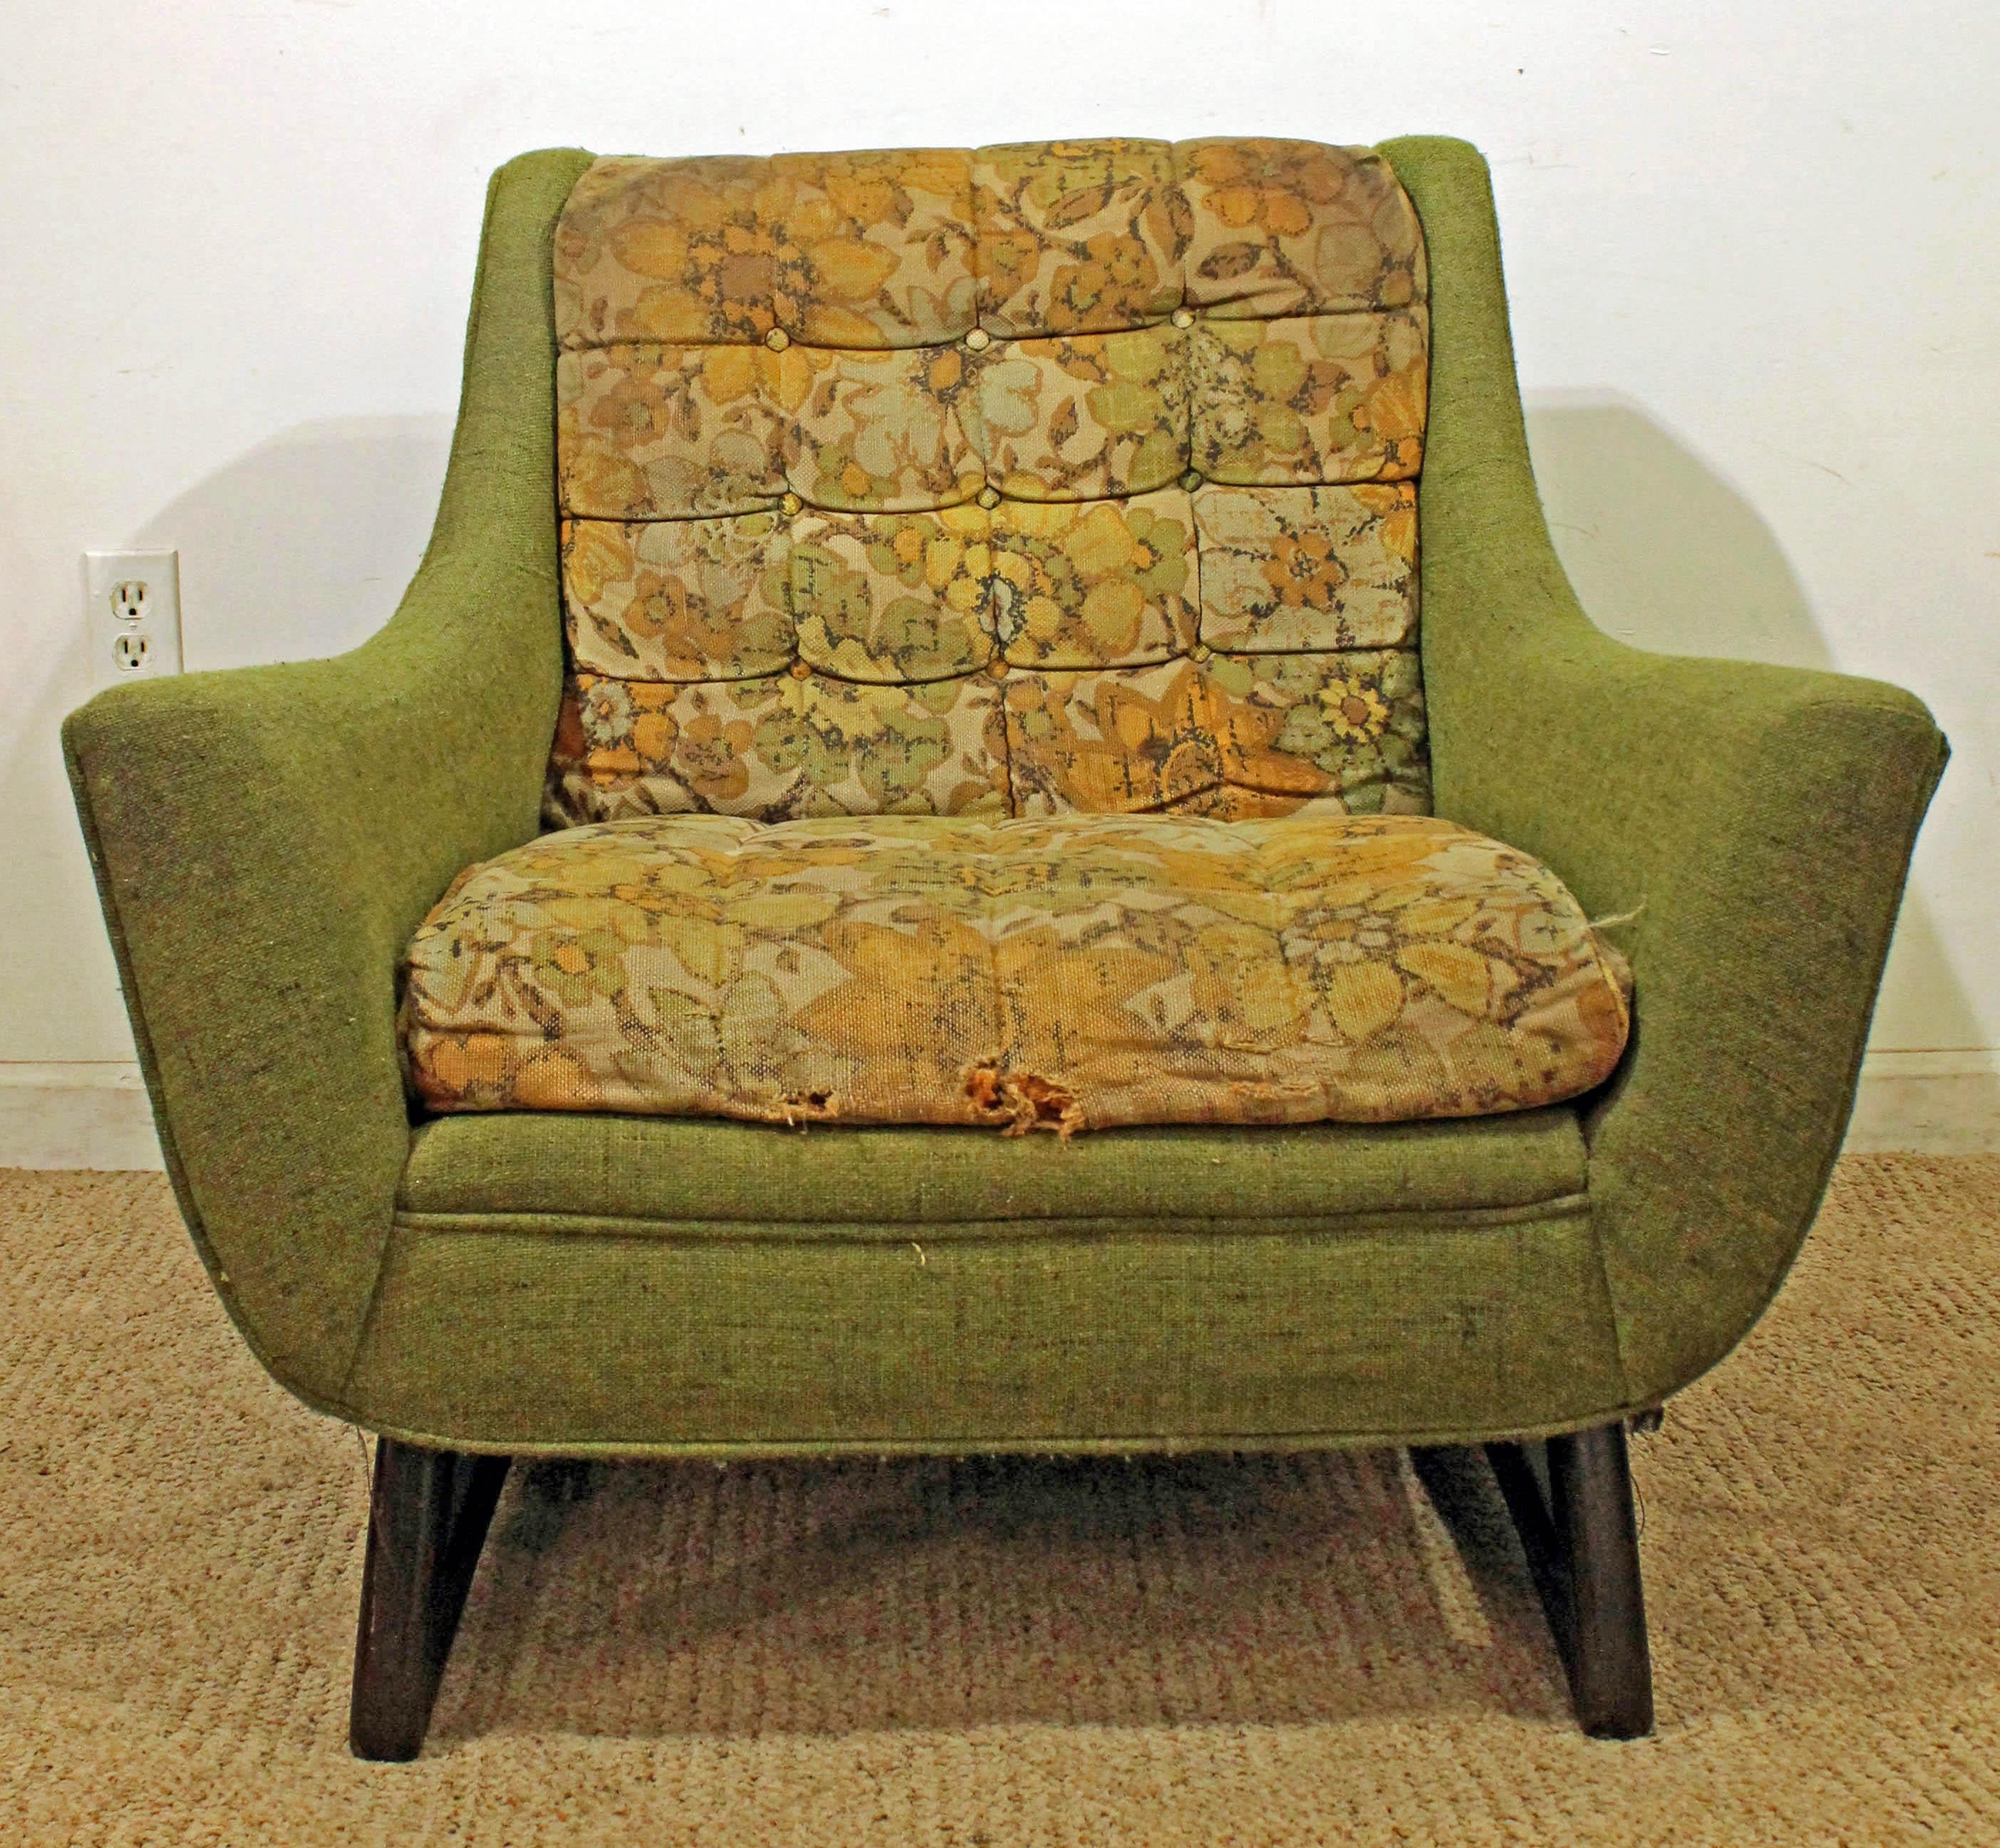 What a find. Offered is a lounge chair attributed to Adrian Pearsall. Features walnut 'boomerang' legs. It is in structurally sound condition, but needs to be reupholstered. It is not signed. See our other listings for more midcentury and Danish